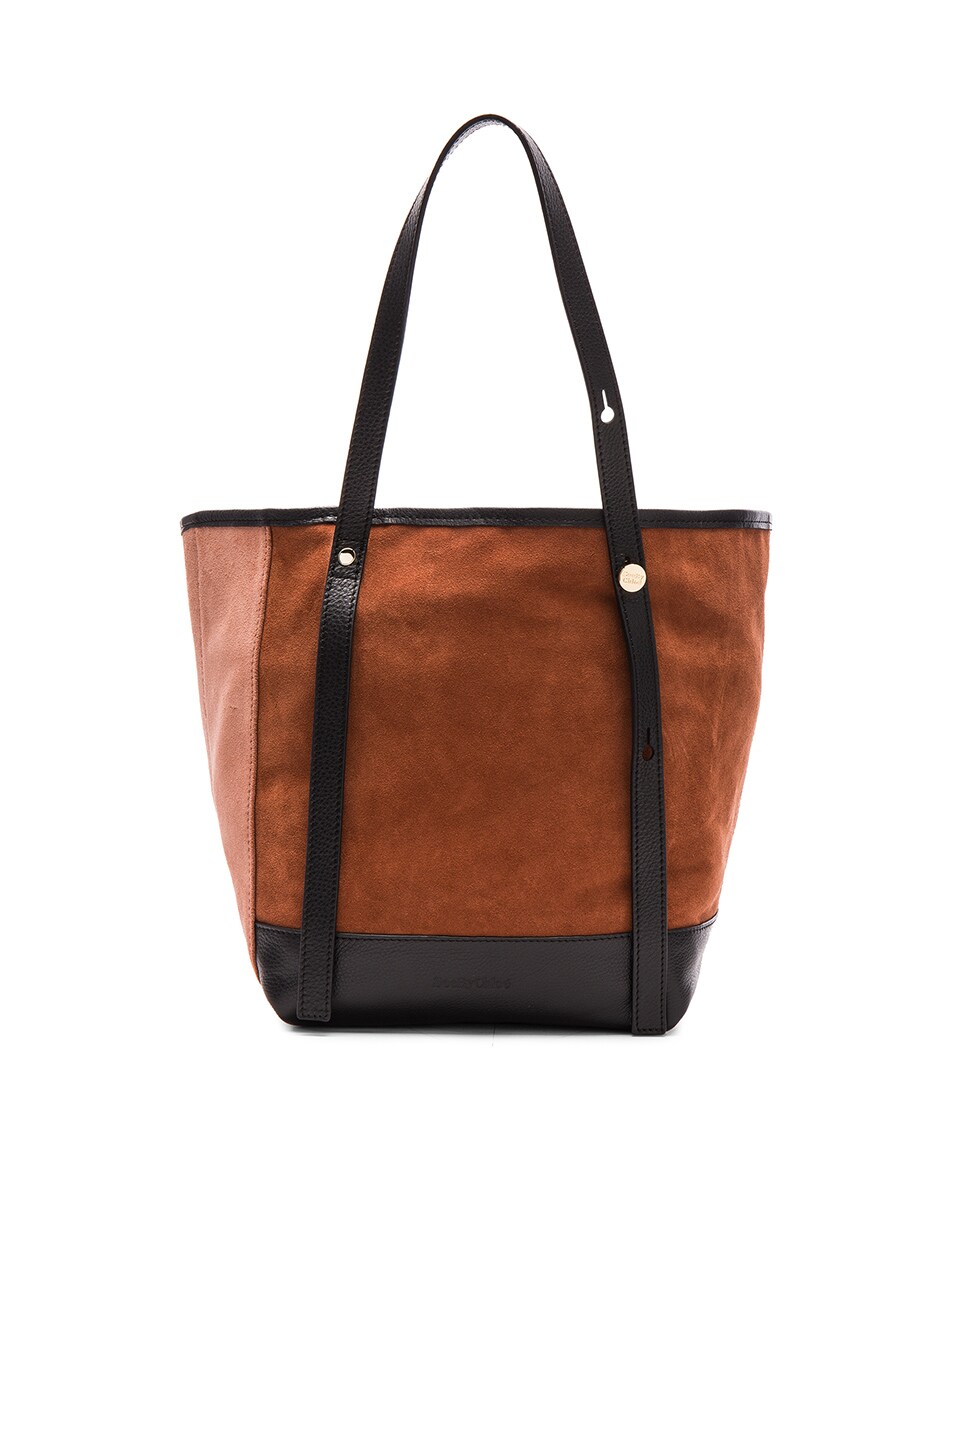 Image 1 of See By Chloe Tote in Chocolate Brown